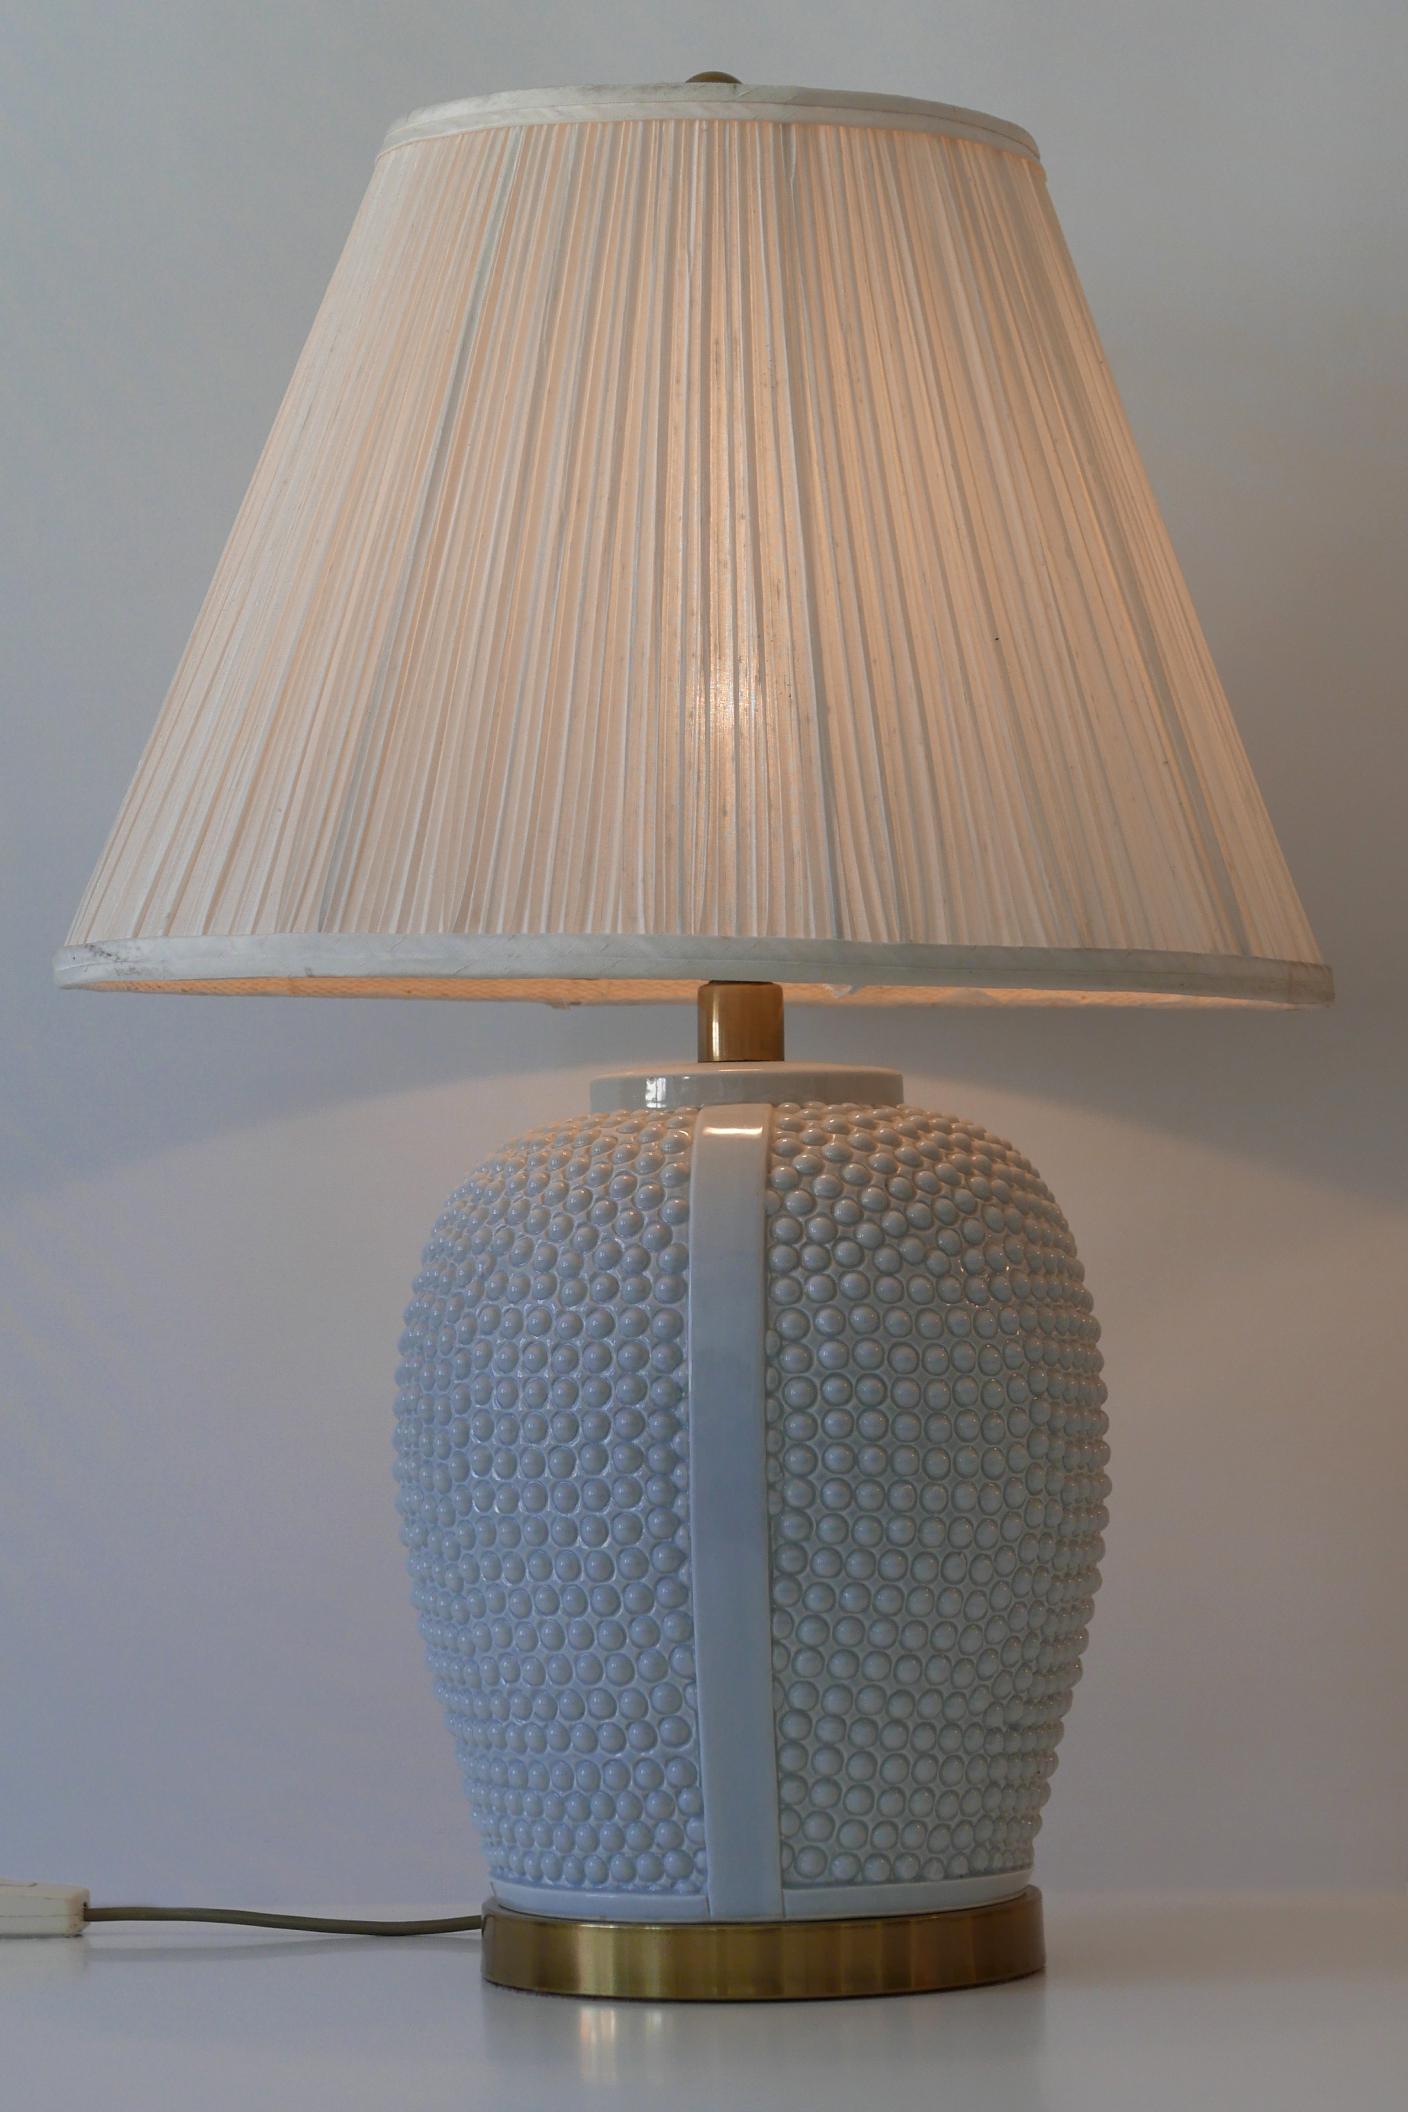 Mid-20th Century Set of Two Exceptional Mid-Century Modern Ceramic Table Lamps, 1960s, Germany For Sale